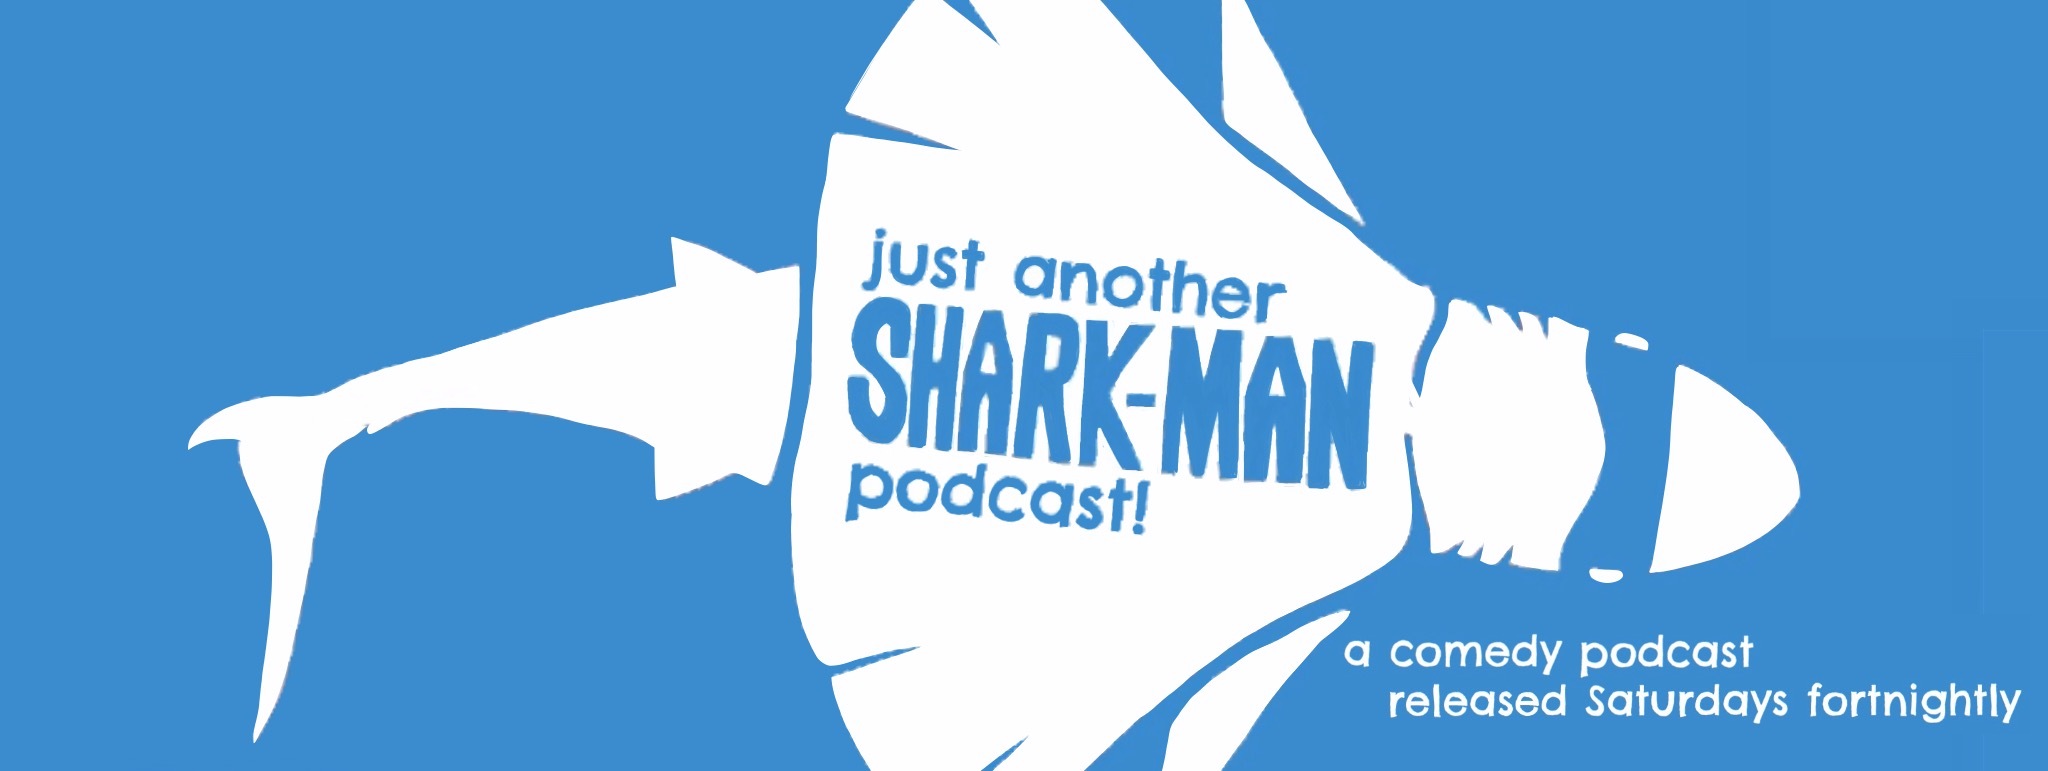 Just Another Shark-Man Podcast!